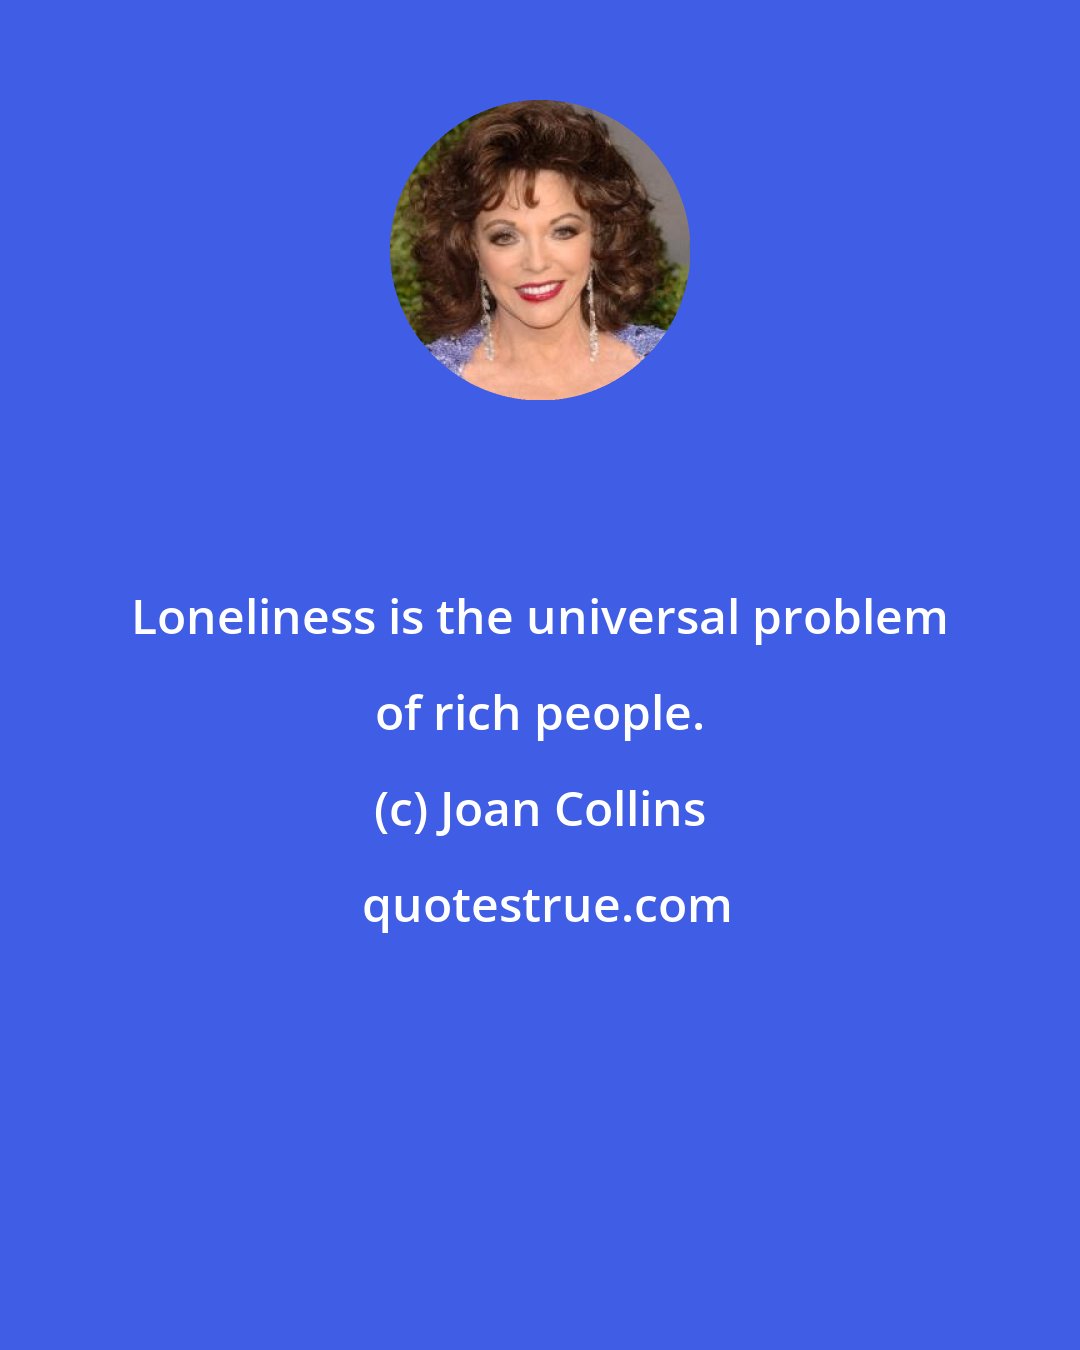 Joan Collins: Loneliness is the universal problem of rich people.